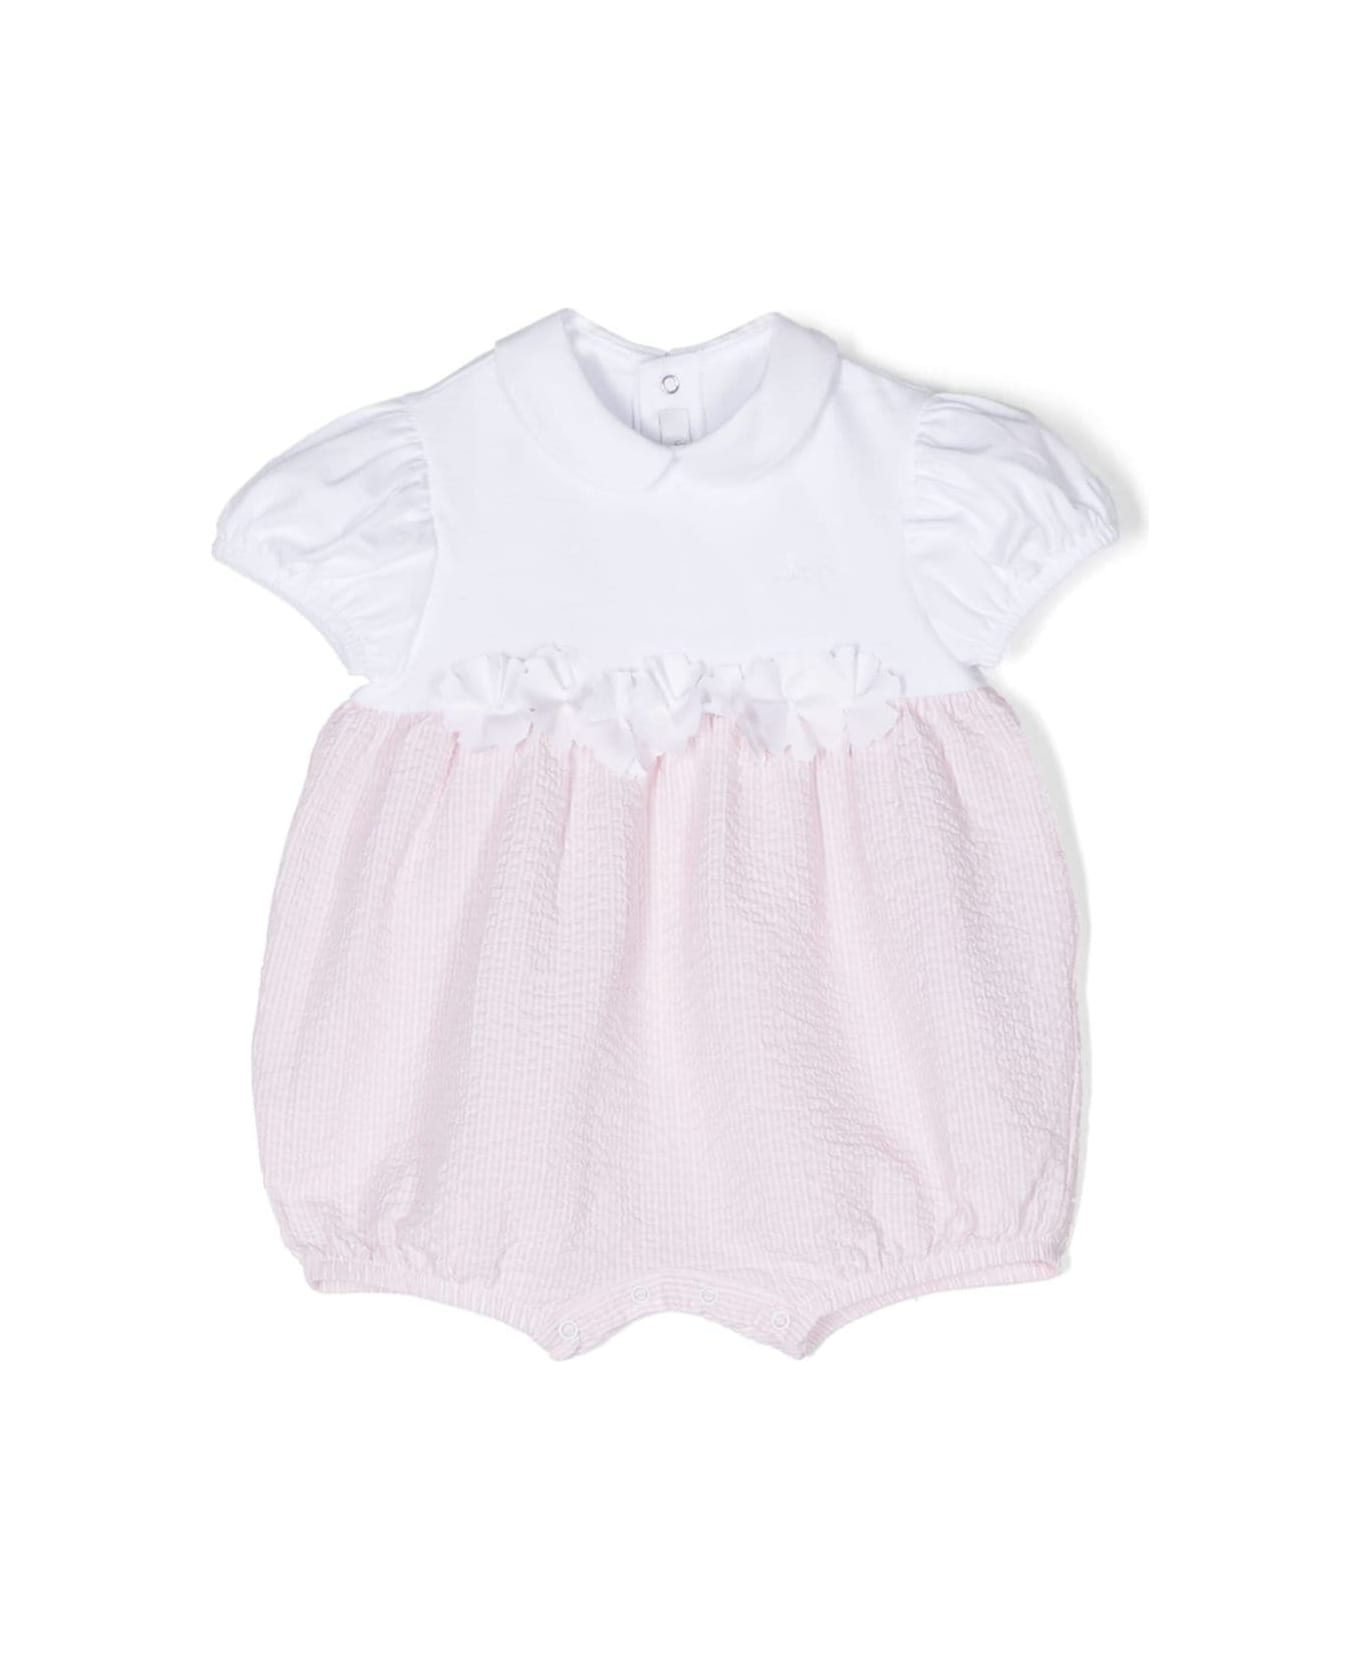 Il Gufo Pink And White Bimateric Short Playsuit With Appliqué Flowers - Pink